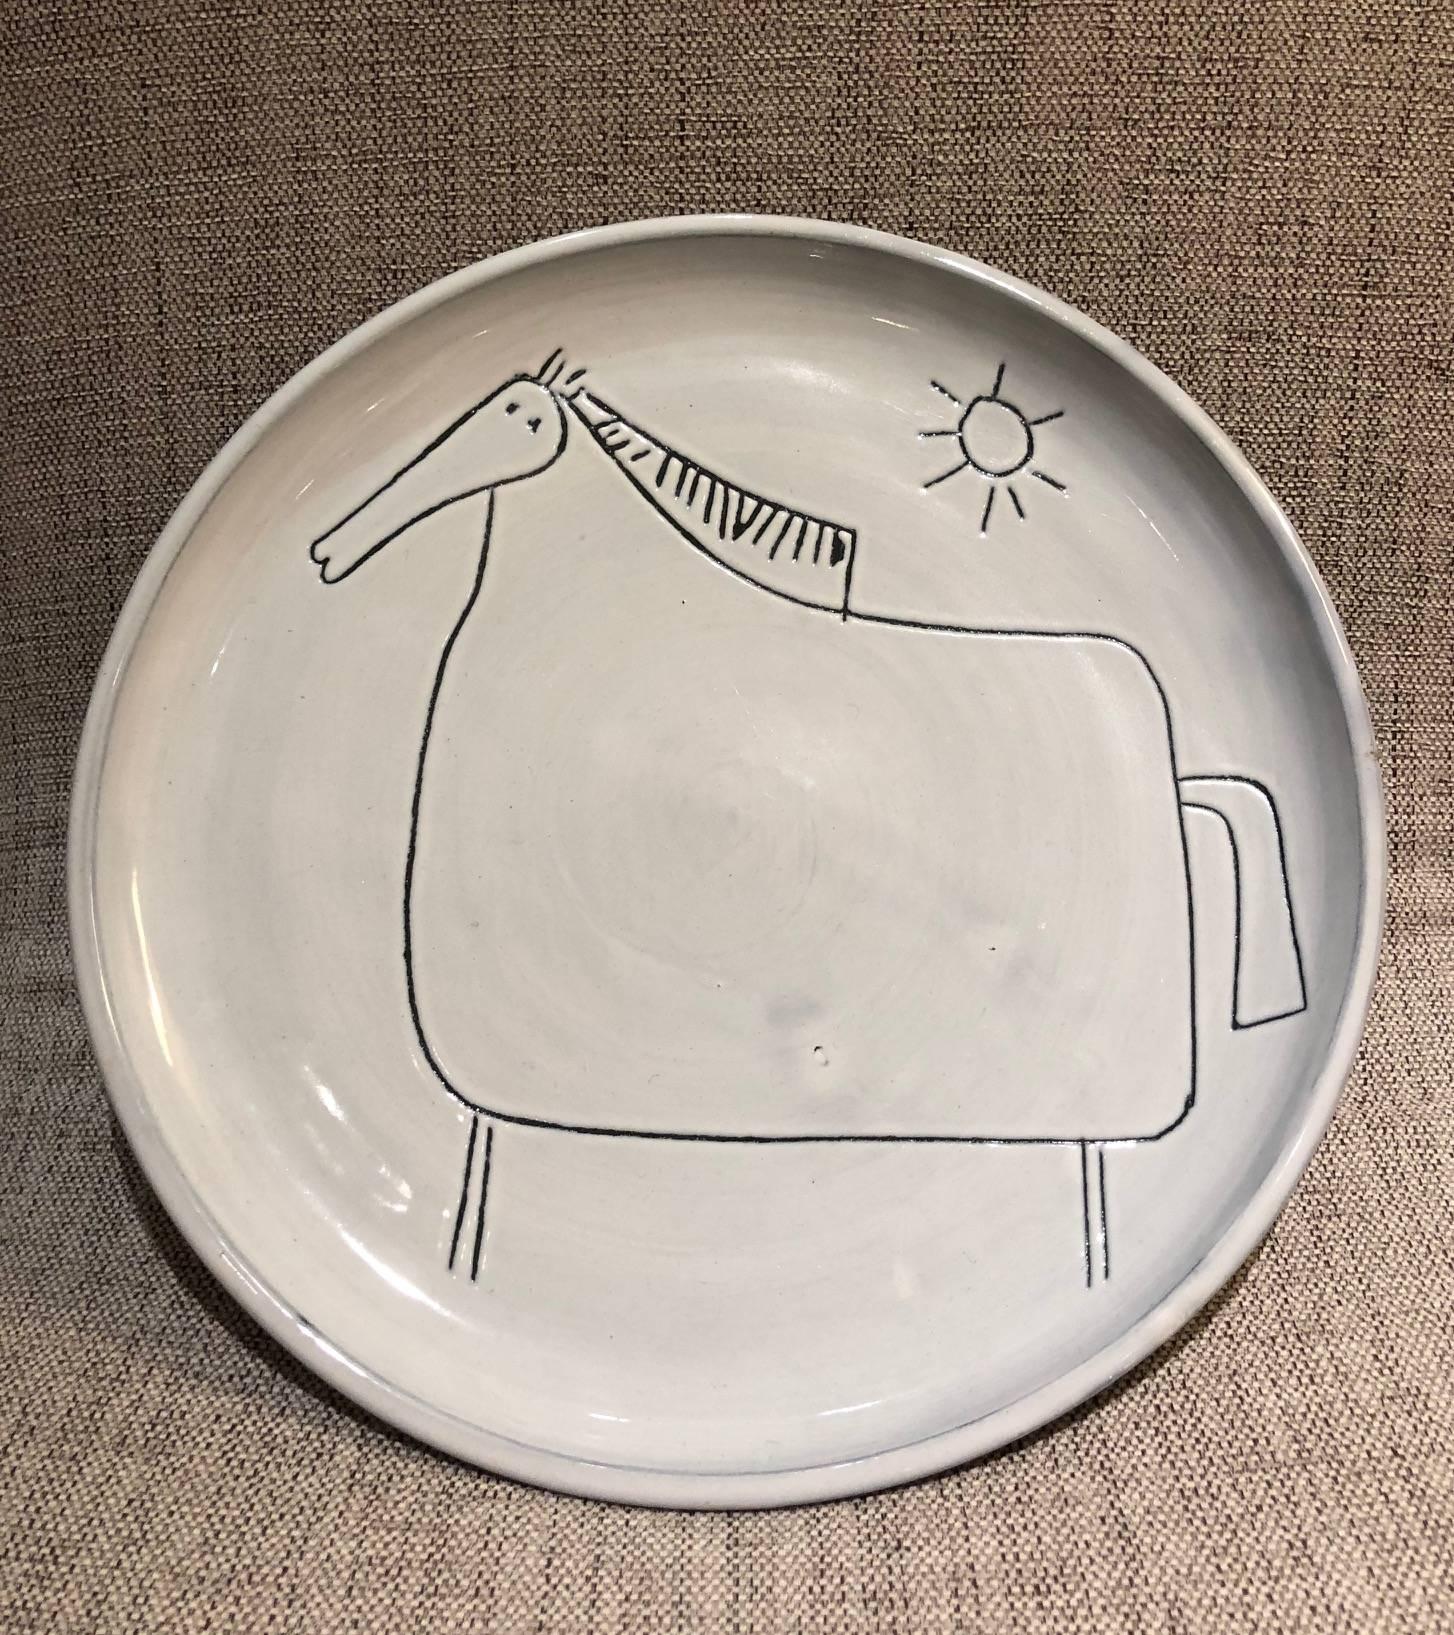 Jacques Innocenti (1926-1958) was born in Paris, and moved to Vallauris as a pottery ceramicist in, 1949.

White enamel dish, Signed back: Innocenti, Vallauris, circa 1950.

Measures: Diameter 28 cm.